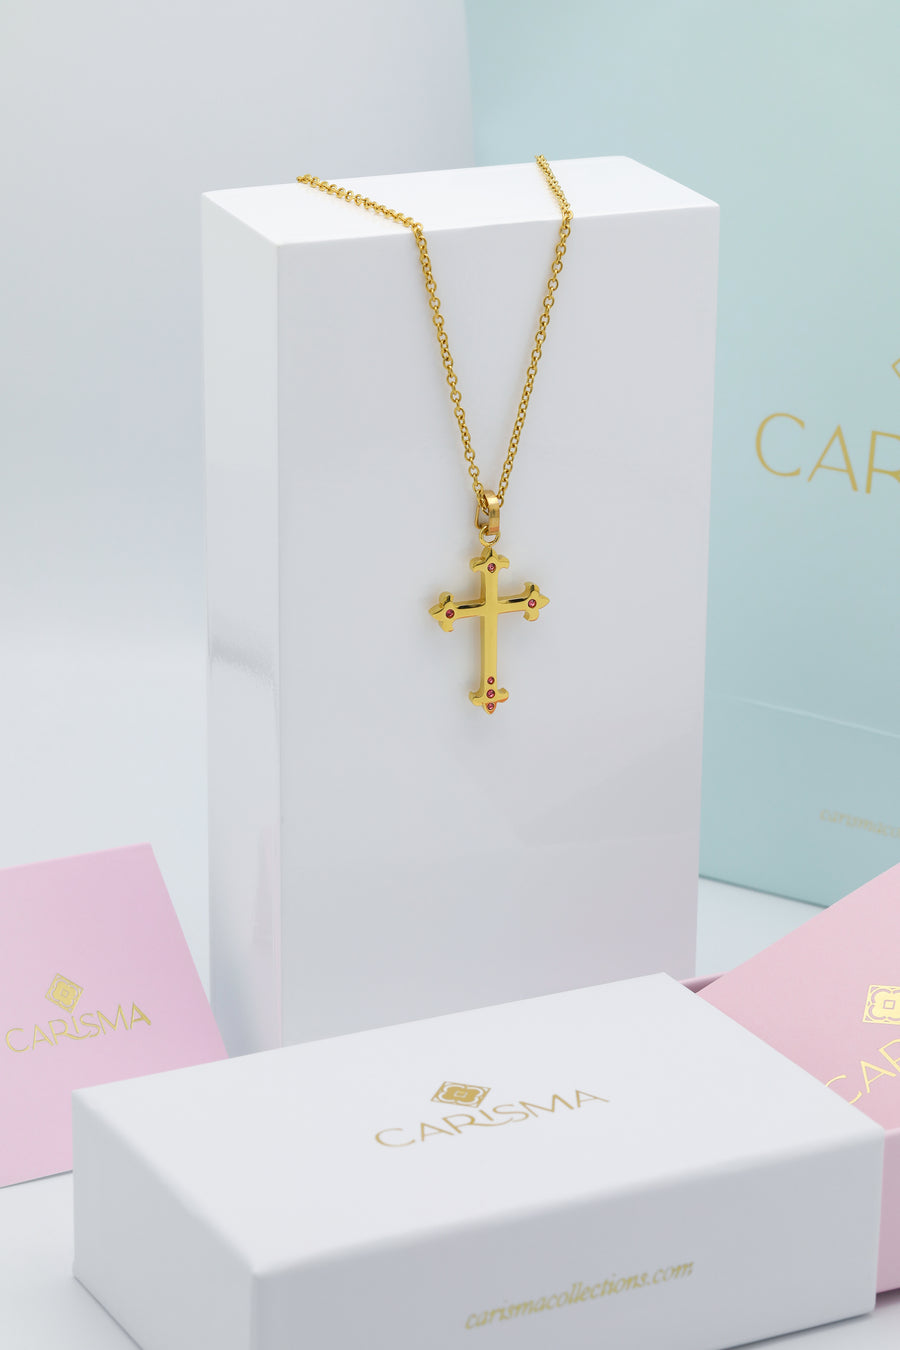 Pink Crystals Carisma Cross Necklace Gift Set